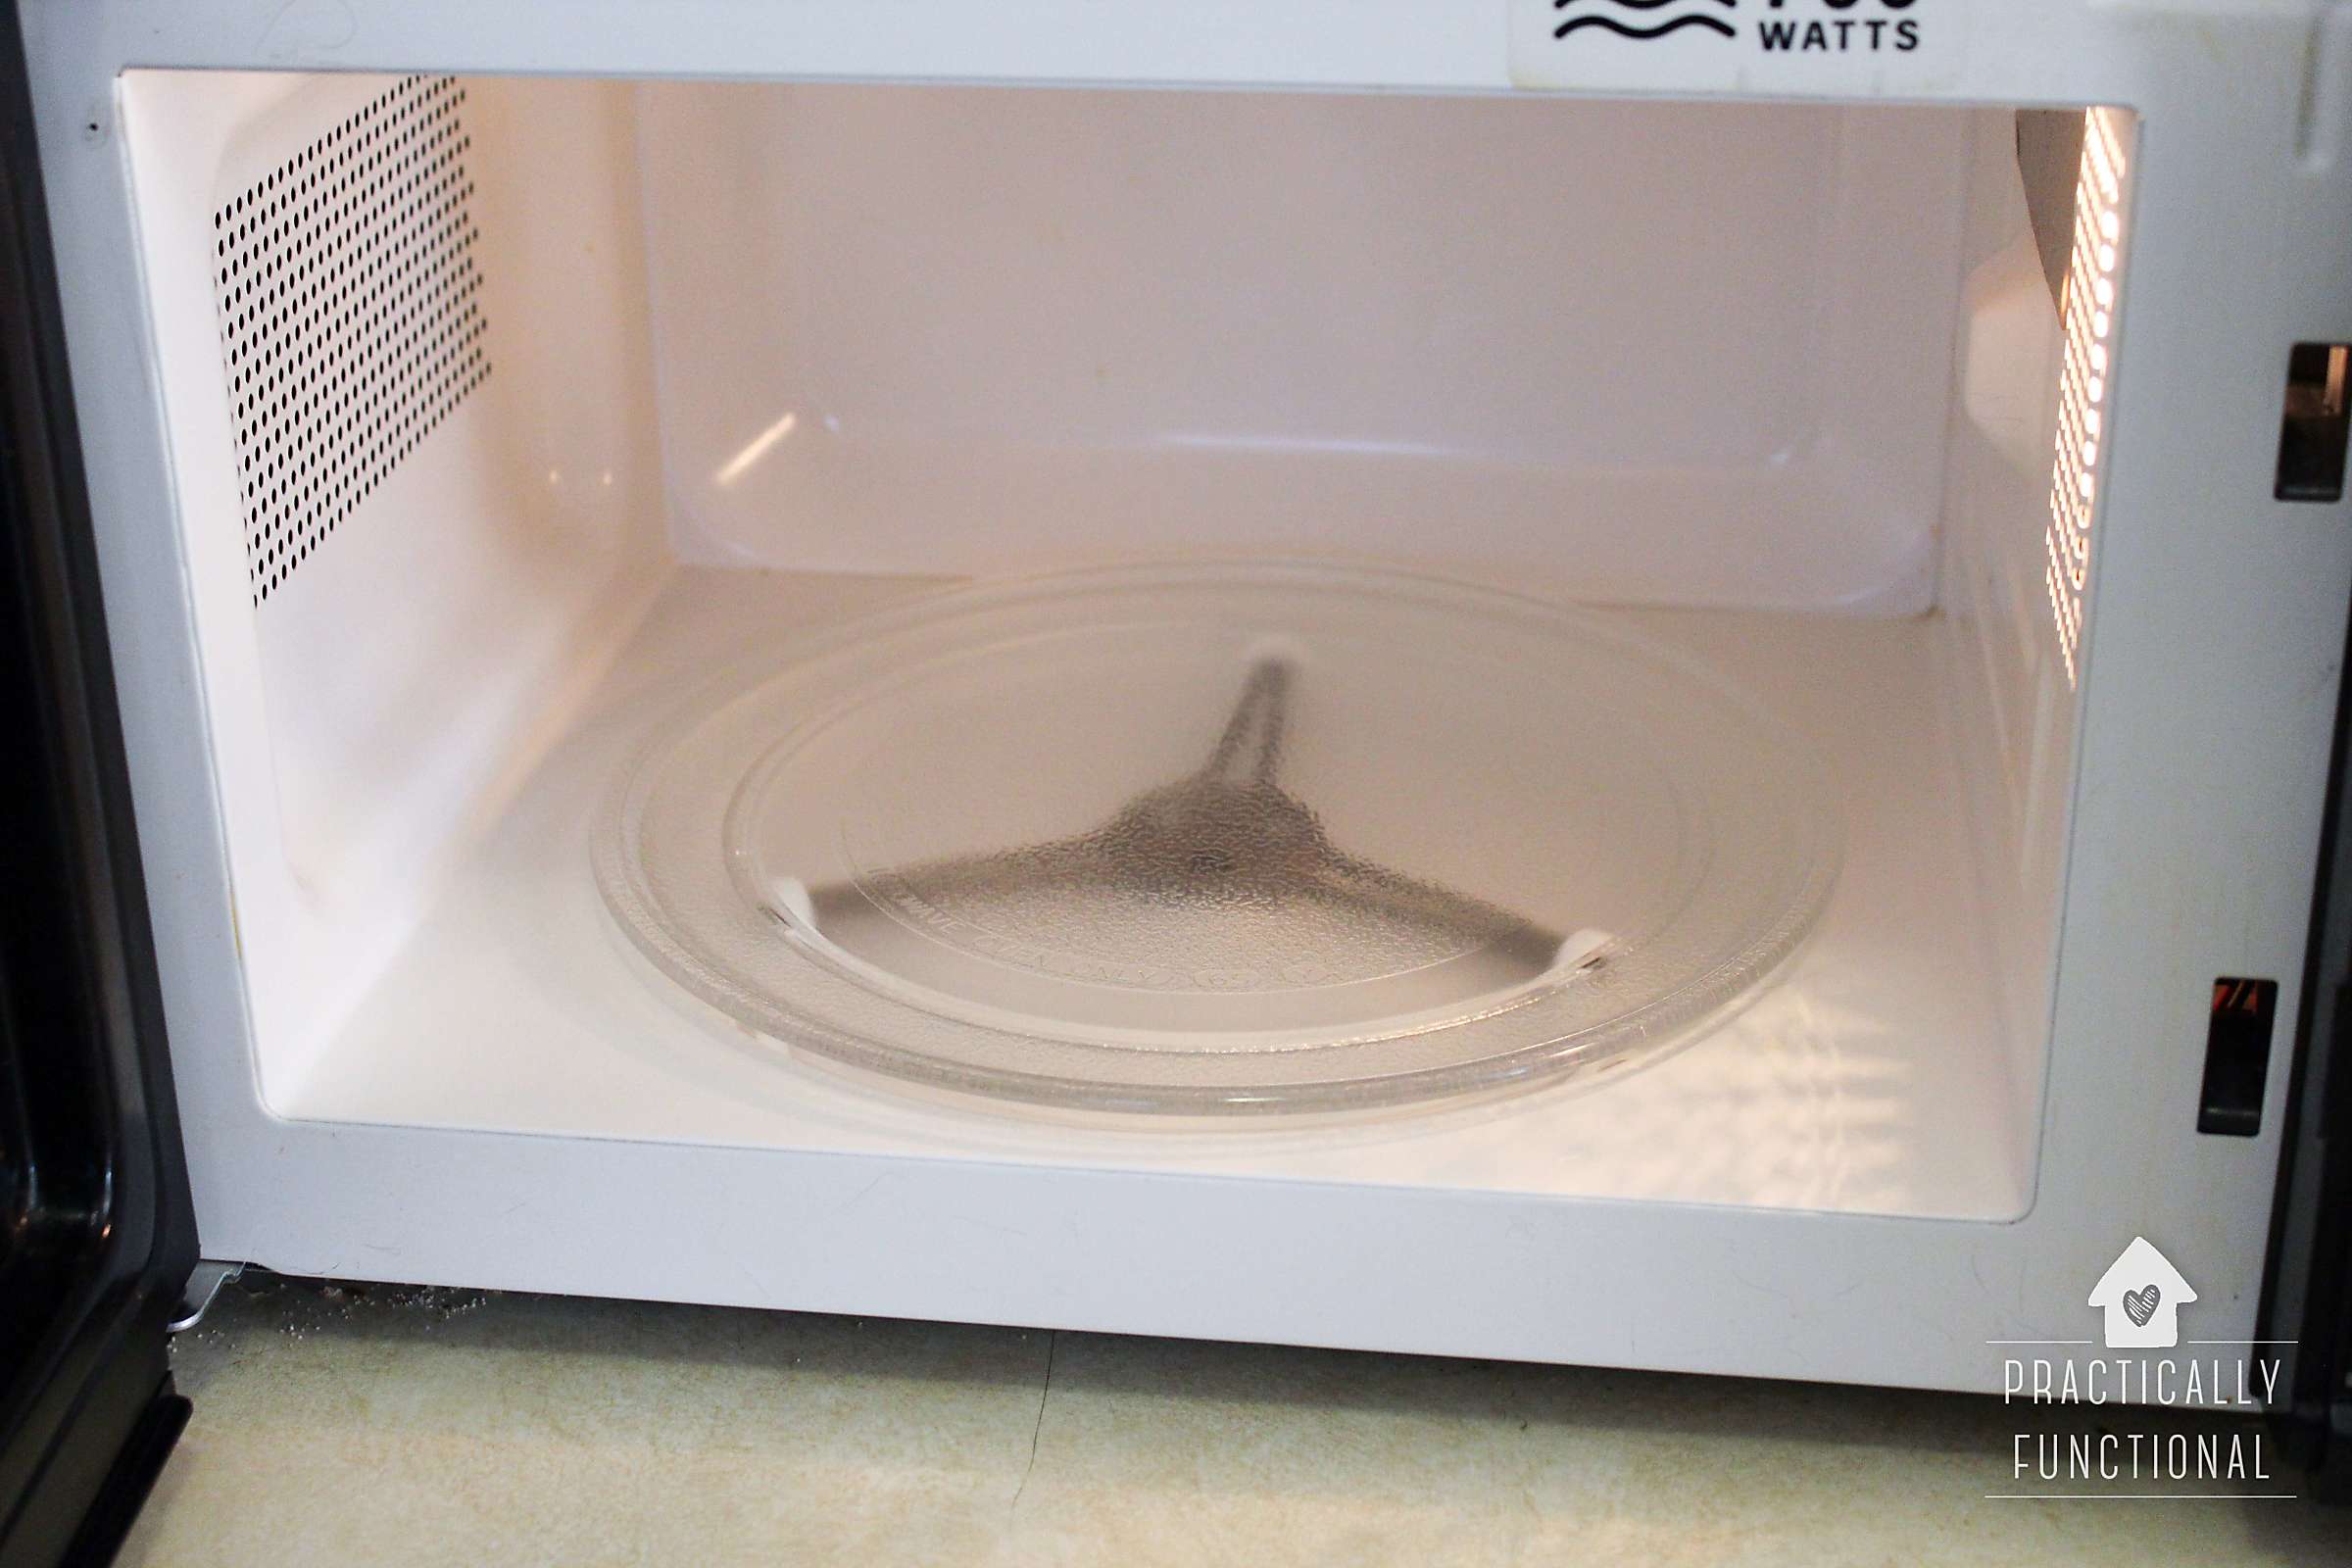 How To Clean A Microwave With Vinegar & Steam; No Scrubbing!